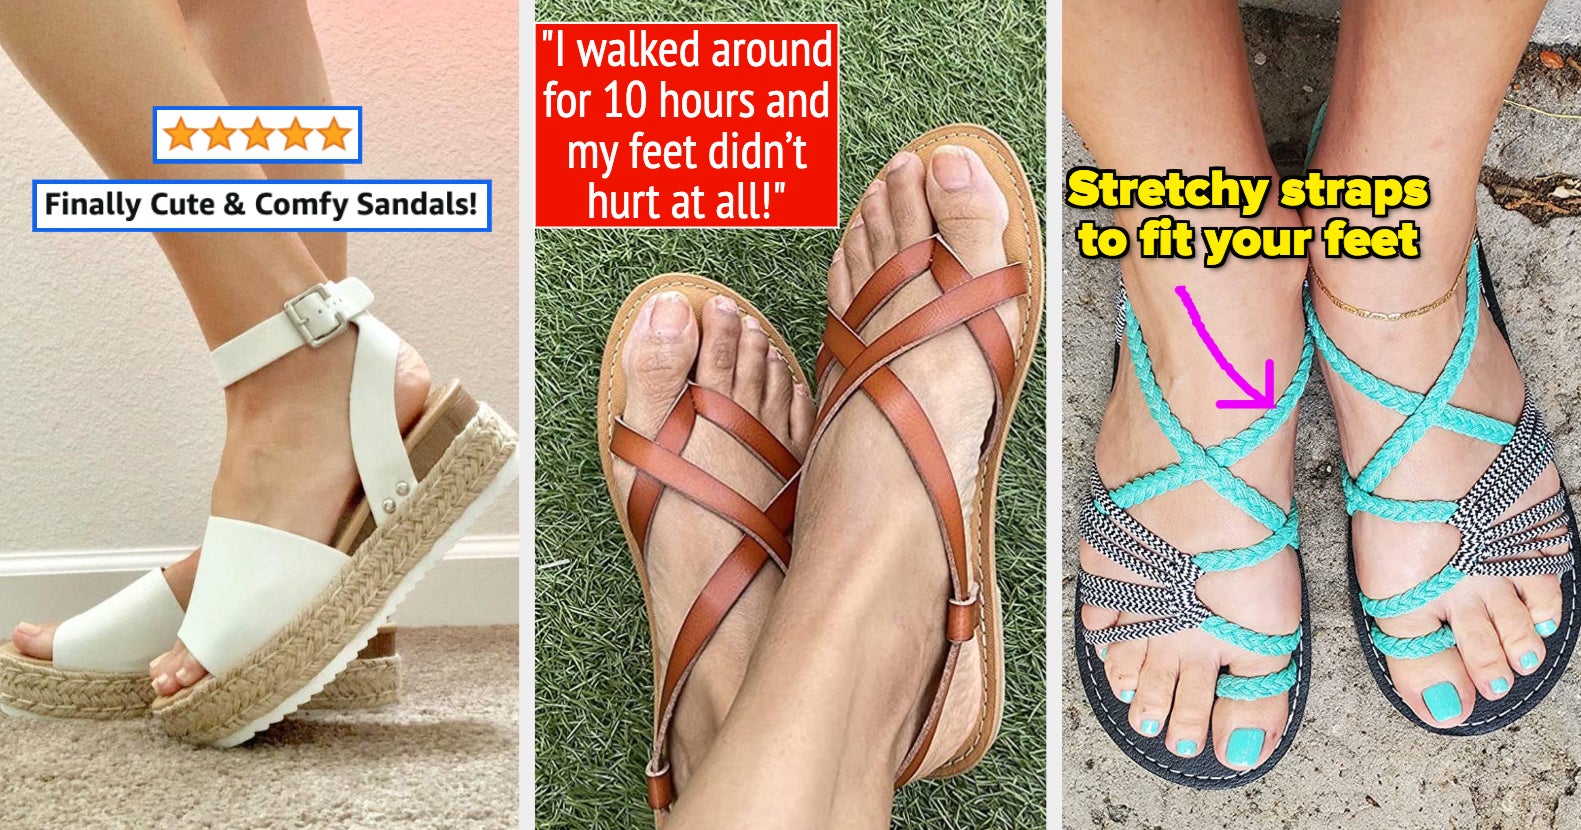 6 Brilliant Ways to Make Already Comfy Sandals Even More Comfortable